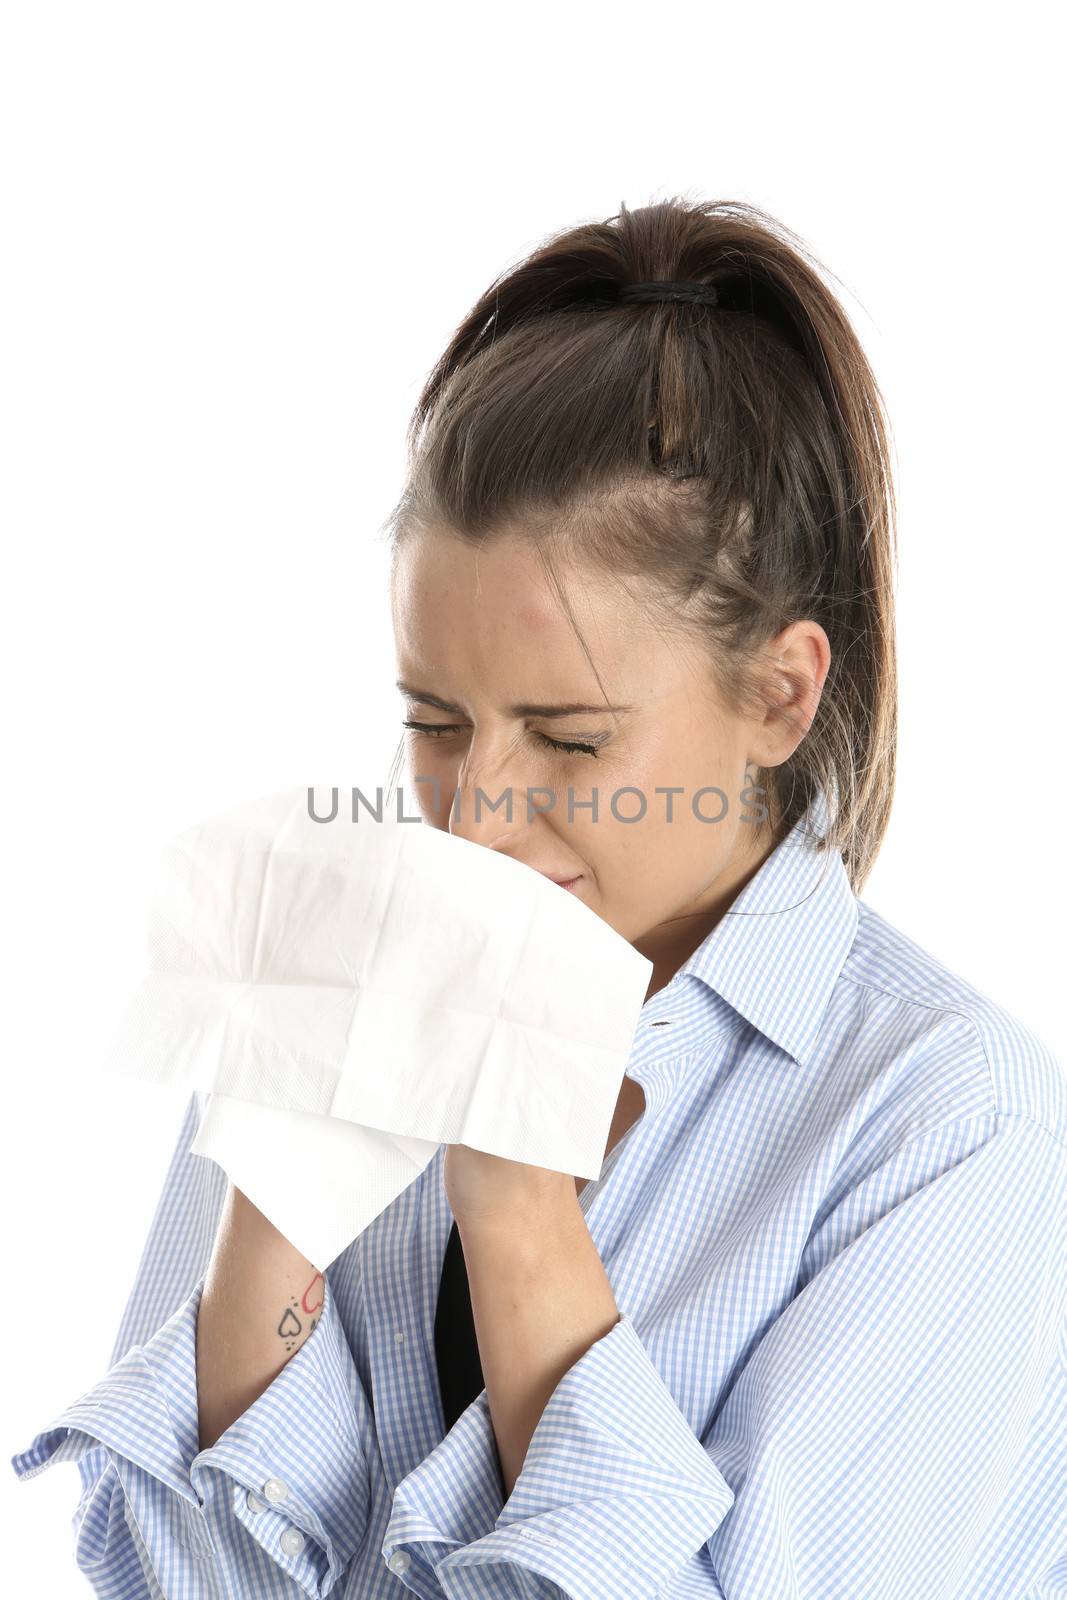 Model Released. Woman Sneezing by Whiteboxmedia